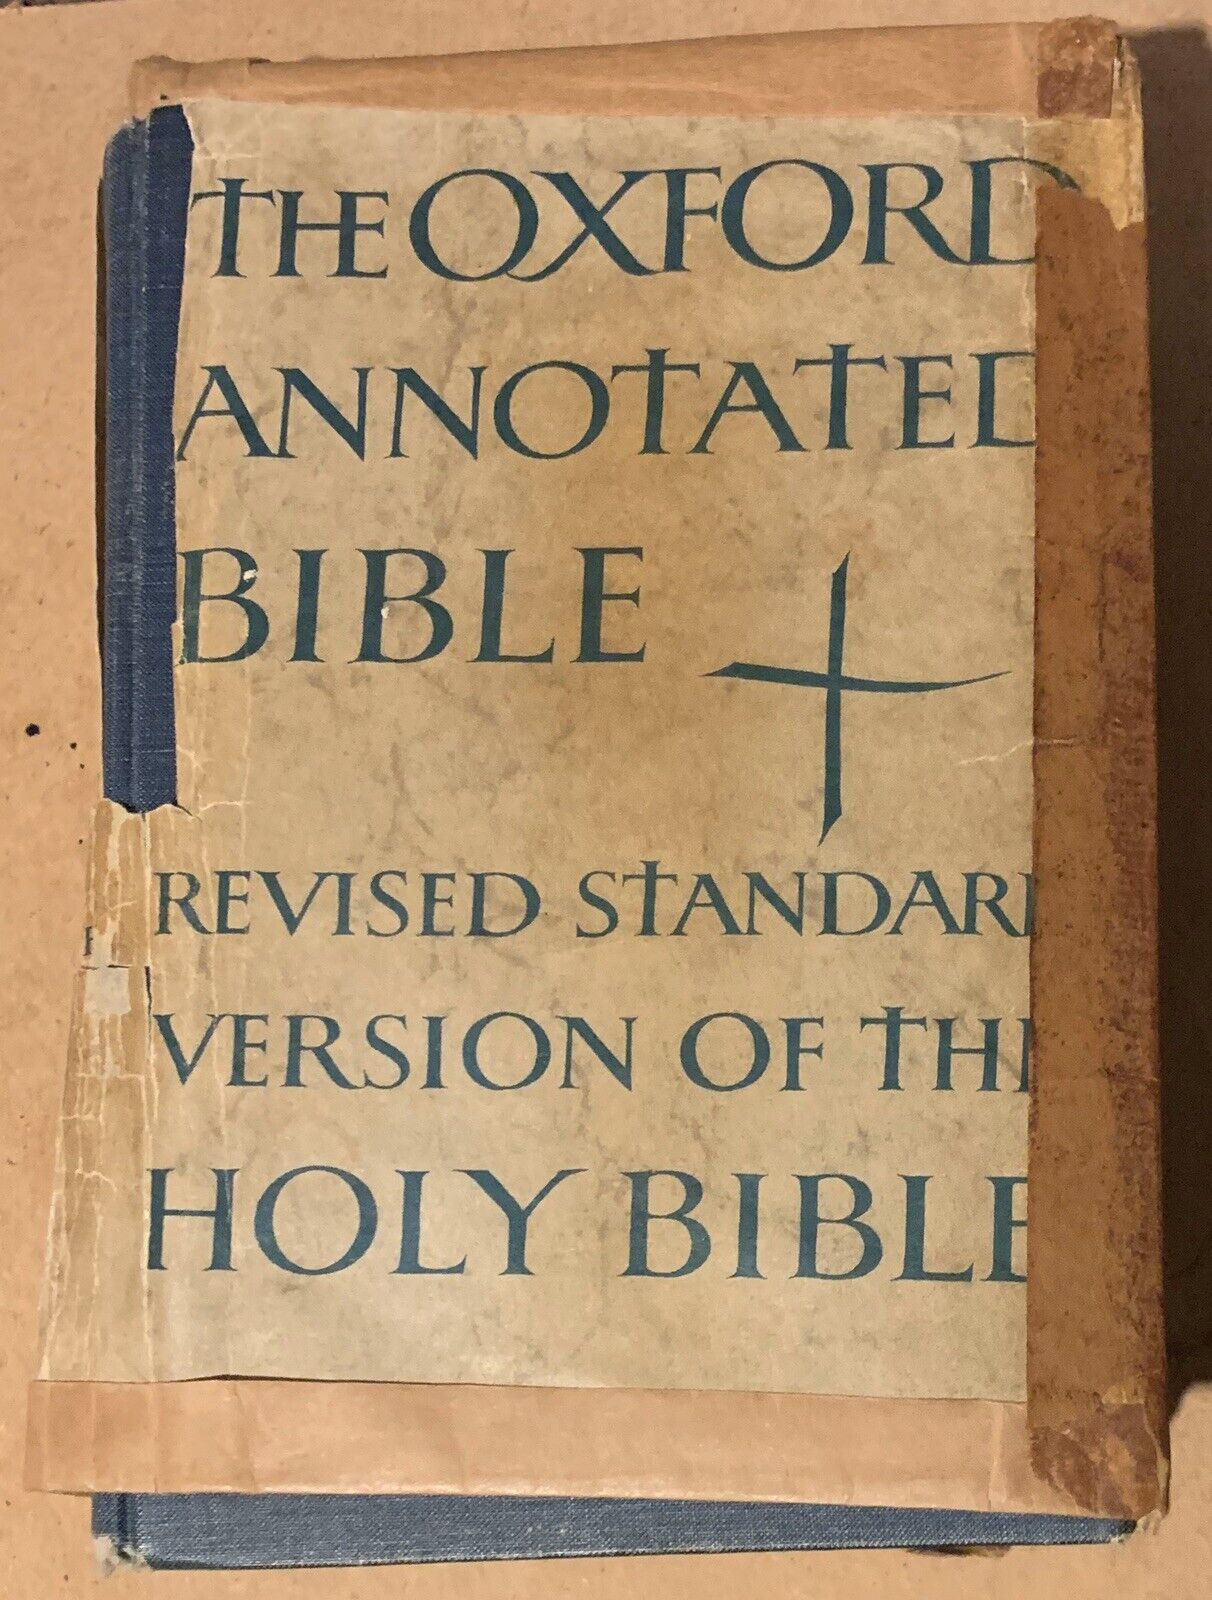 The Oxford Annotated Bible Revised Standard Version Holy Bible Used